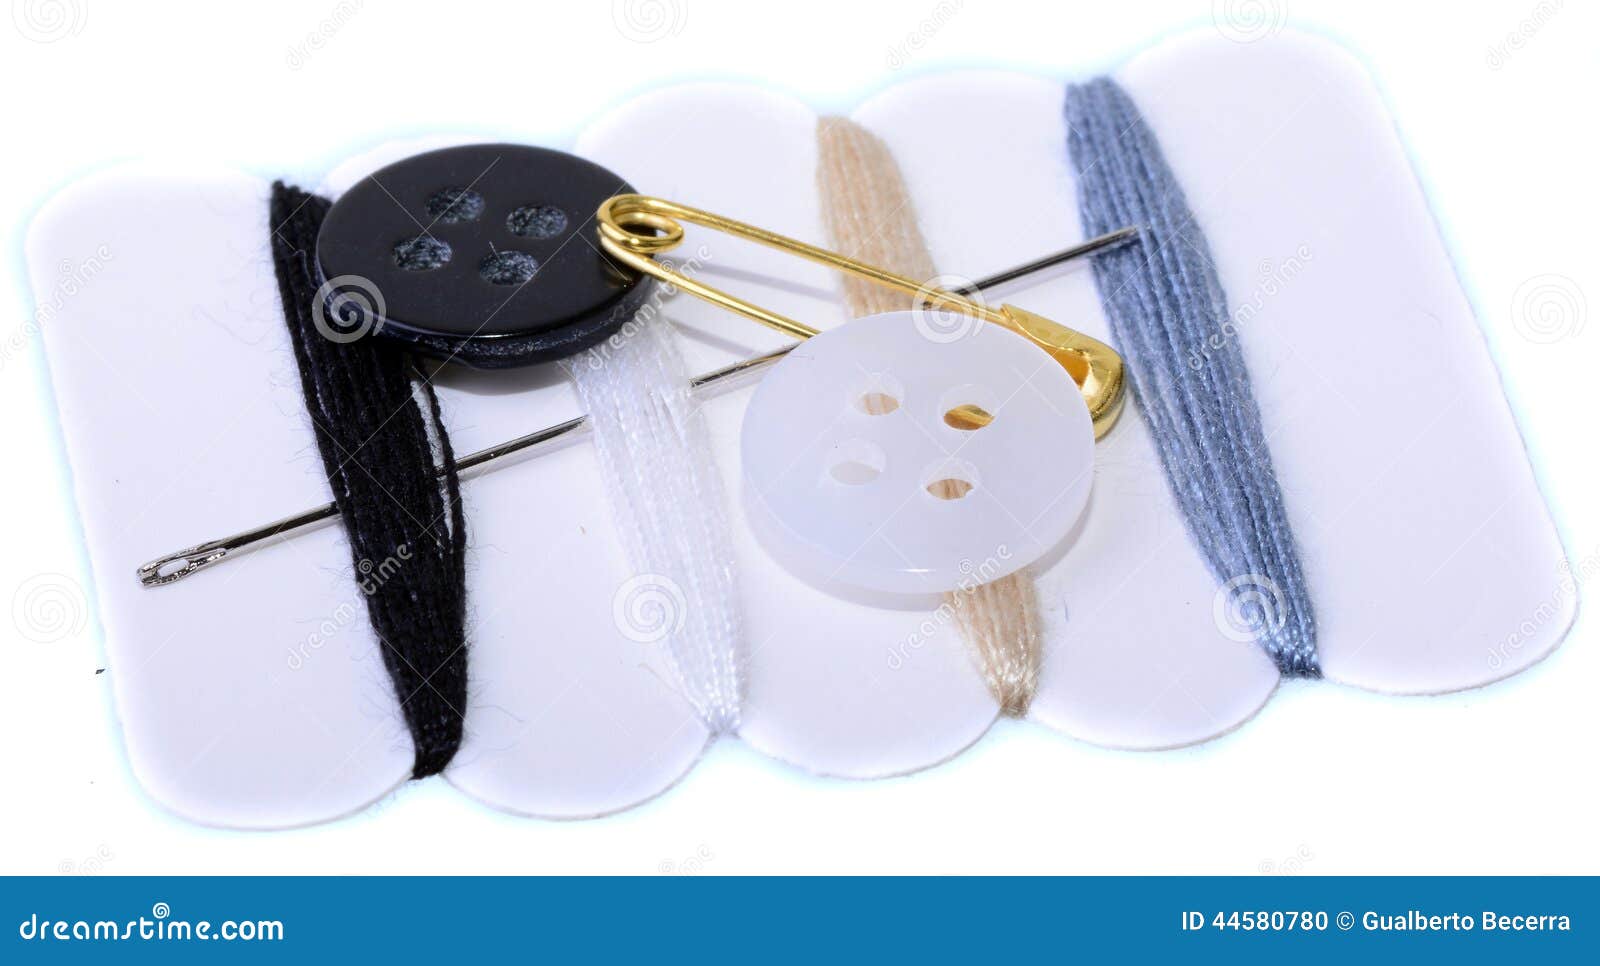 Best Emergency Sewing Kit Royalty-Free Images, Stock Photos & Pictures